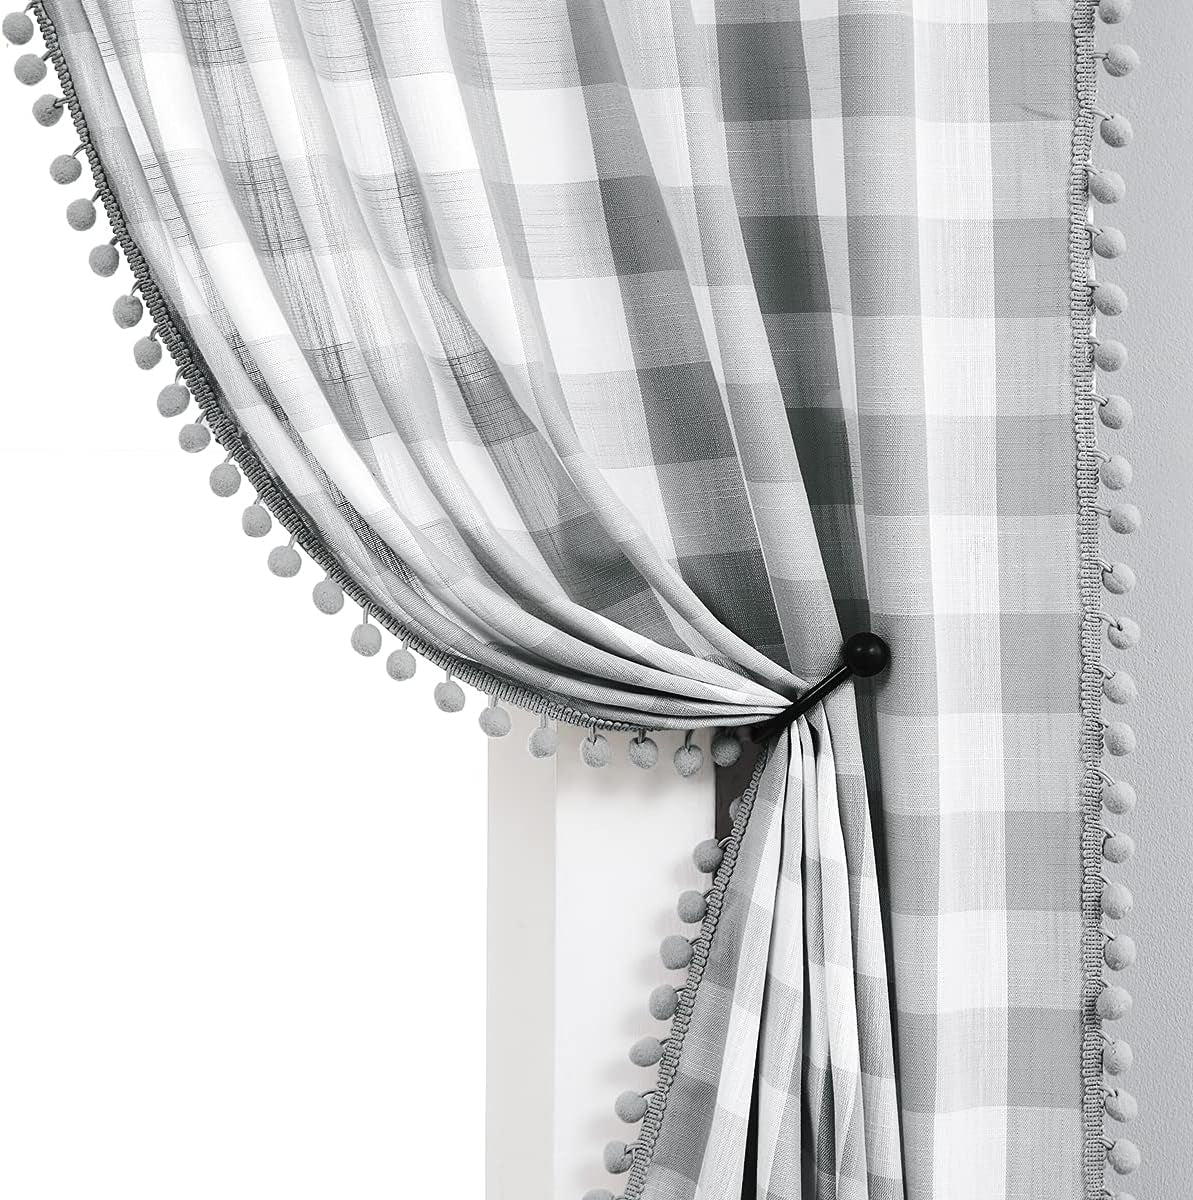 Treatmentex Buffalo Check Curtains 84Inch Farmhouse Pom Pom Drapes for Living Room Vintage Gingham Plaid Semi Sheer Tan Window Curtains for Bedroom Kitchen 2 Panels Rod Pocket Taupe and White  Natural Decoratex Grey And White 40"W X 63"L 2Pcs 